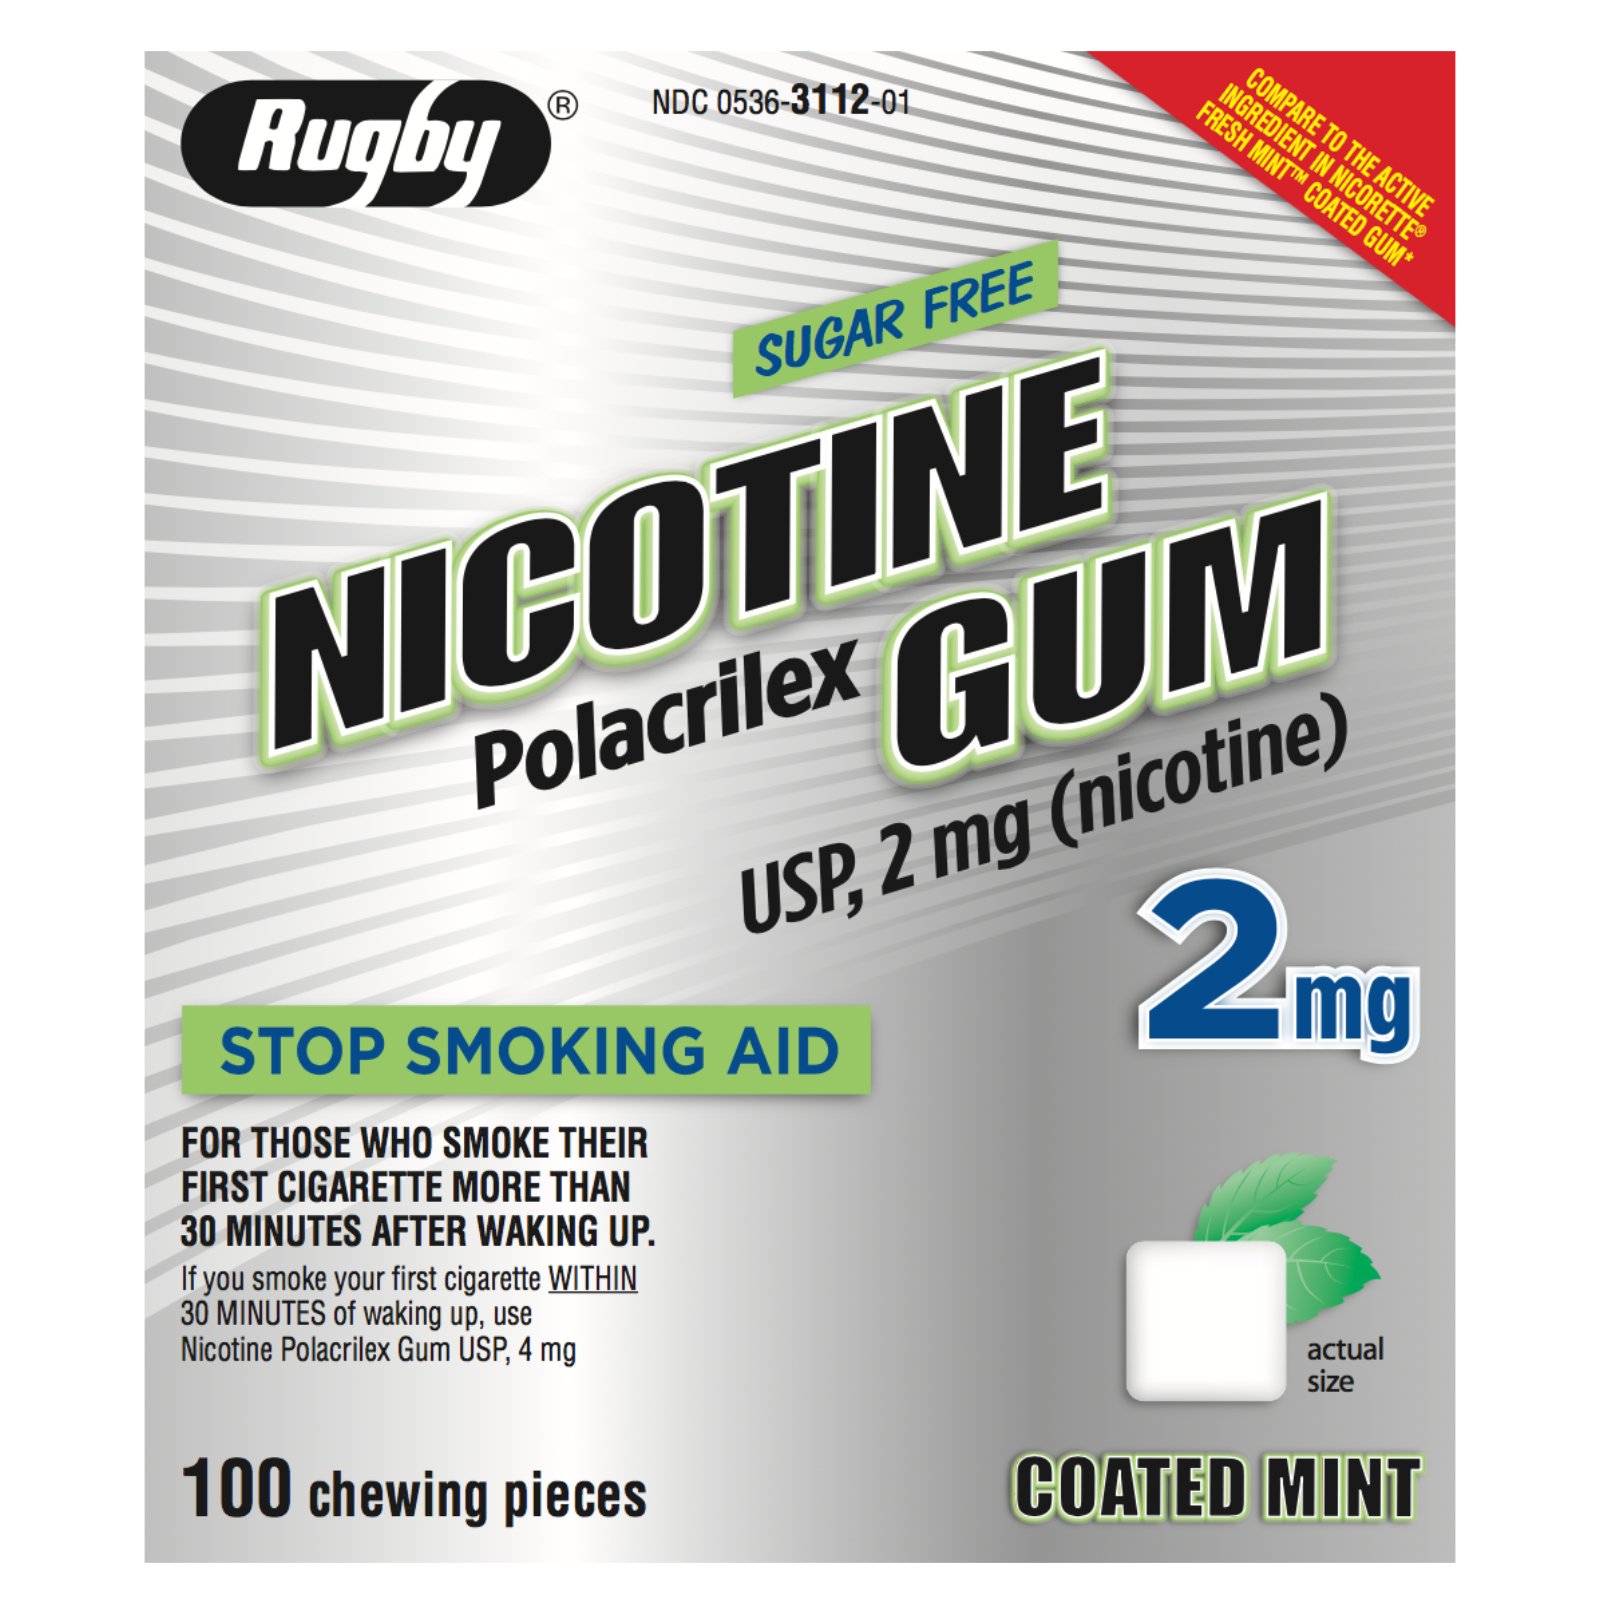 Nicotine Gum 2mg Sugar Free Coated Mint Generic for Nicorette 100 Pieces per ... - Buy Packs and SAVE (Pack of 3)